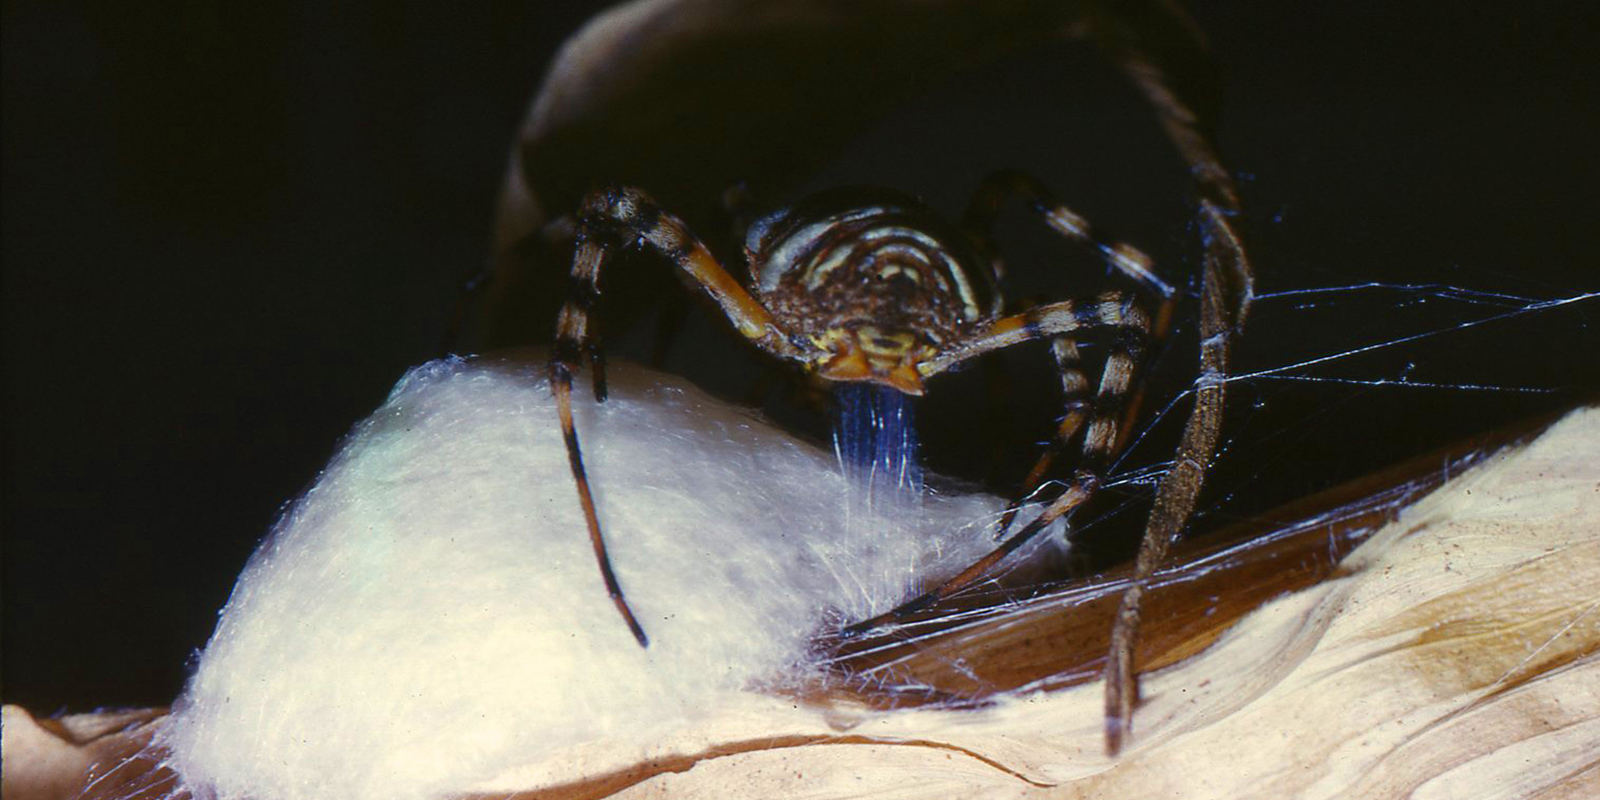 A close up of an orbweaver spider creating her egg sac